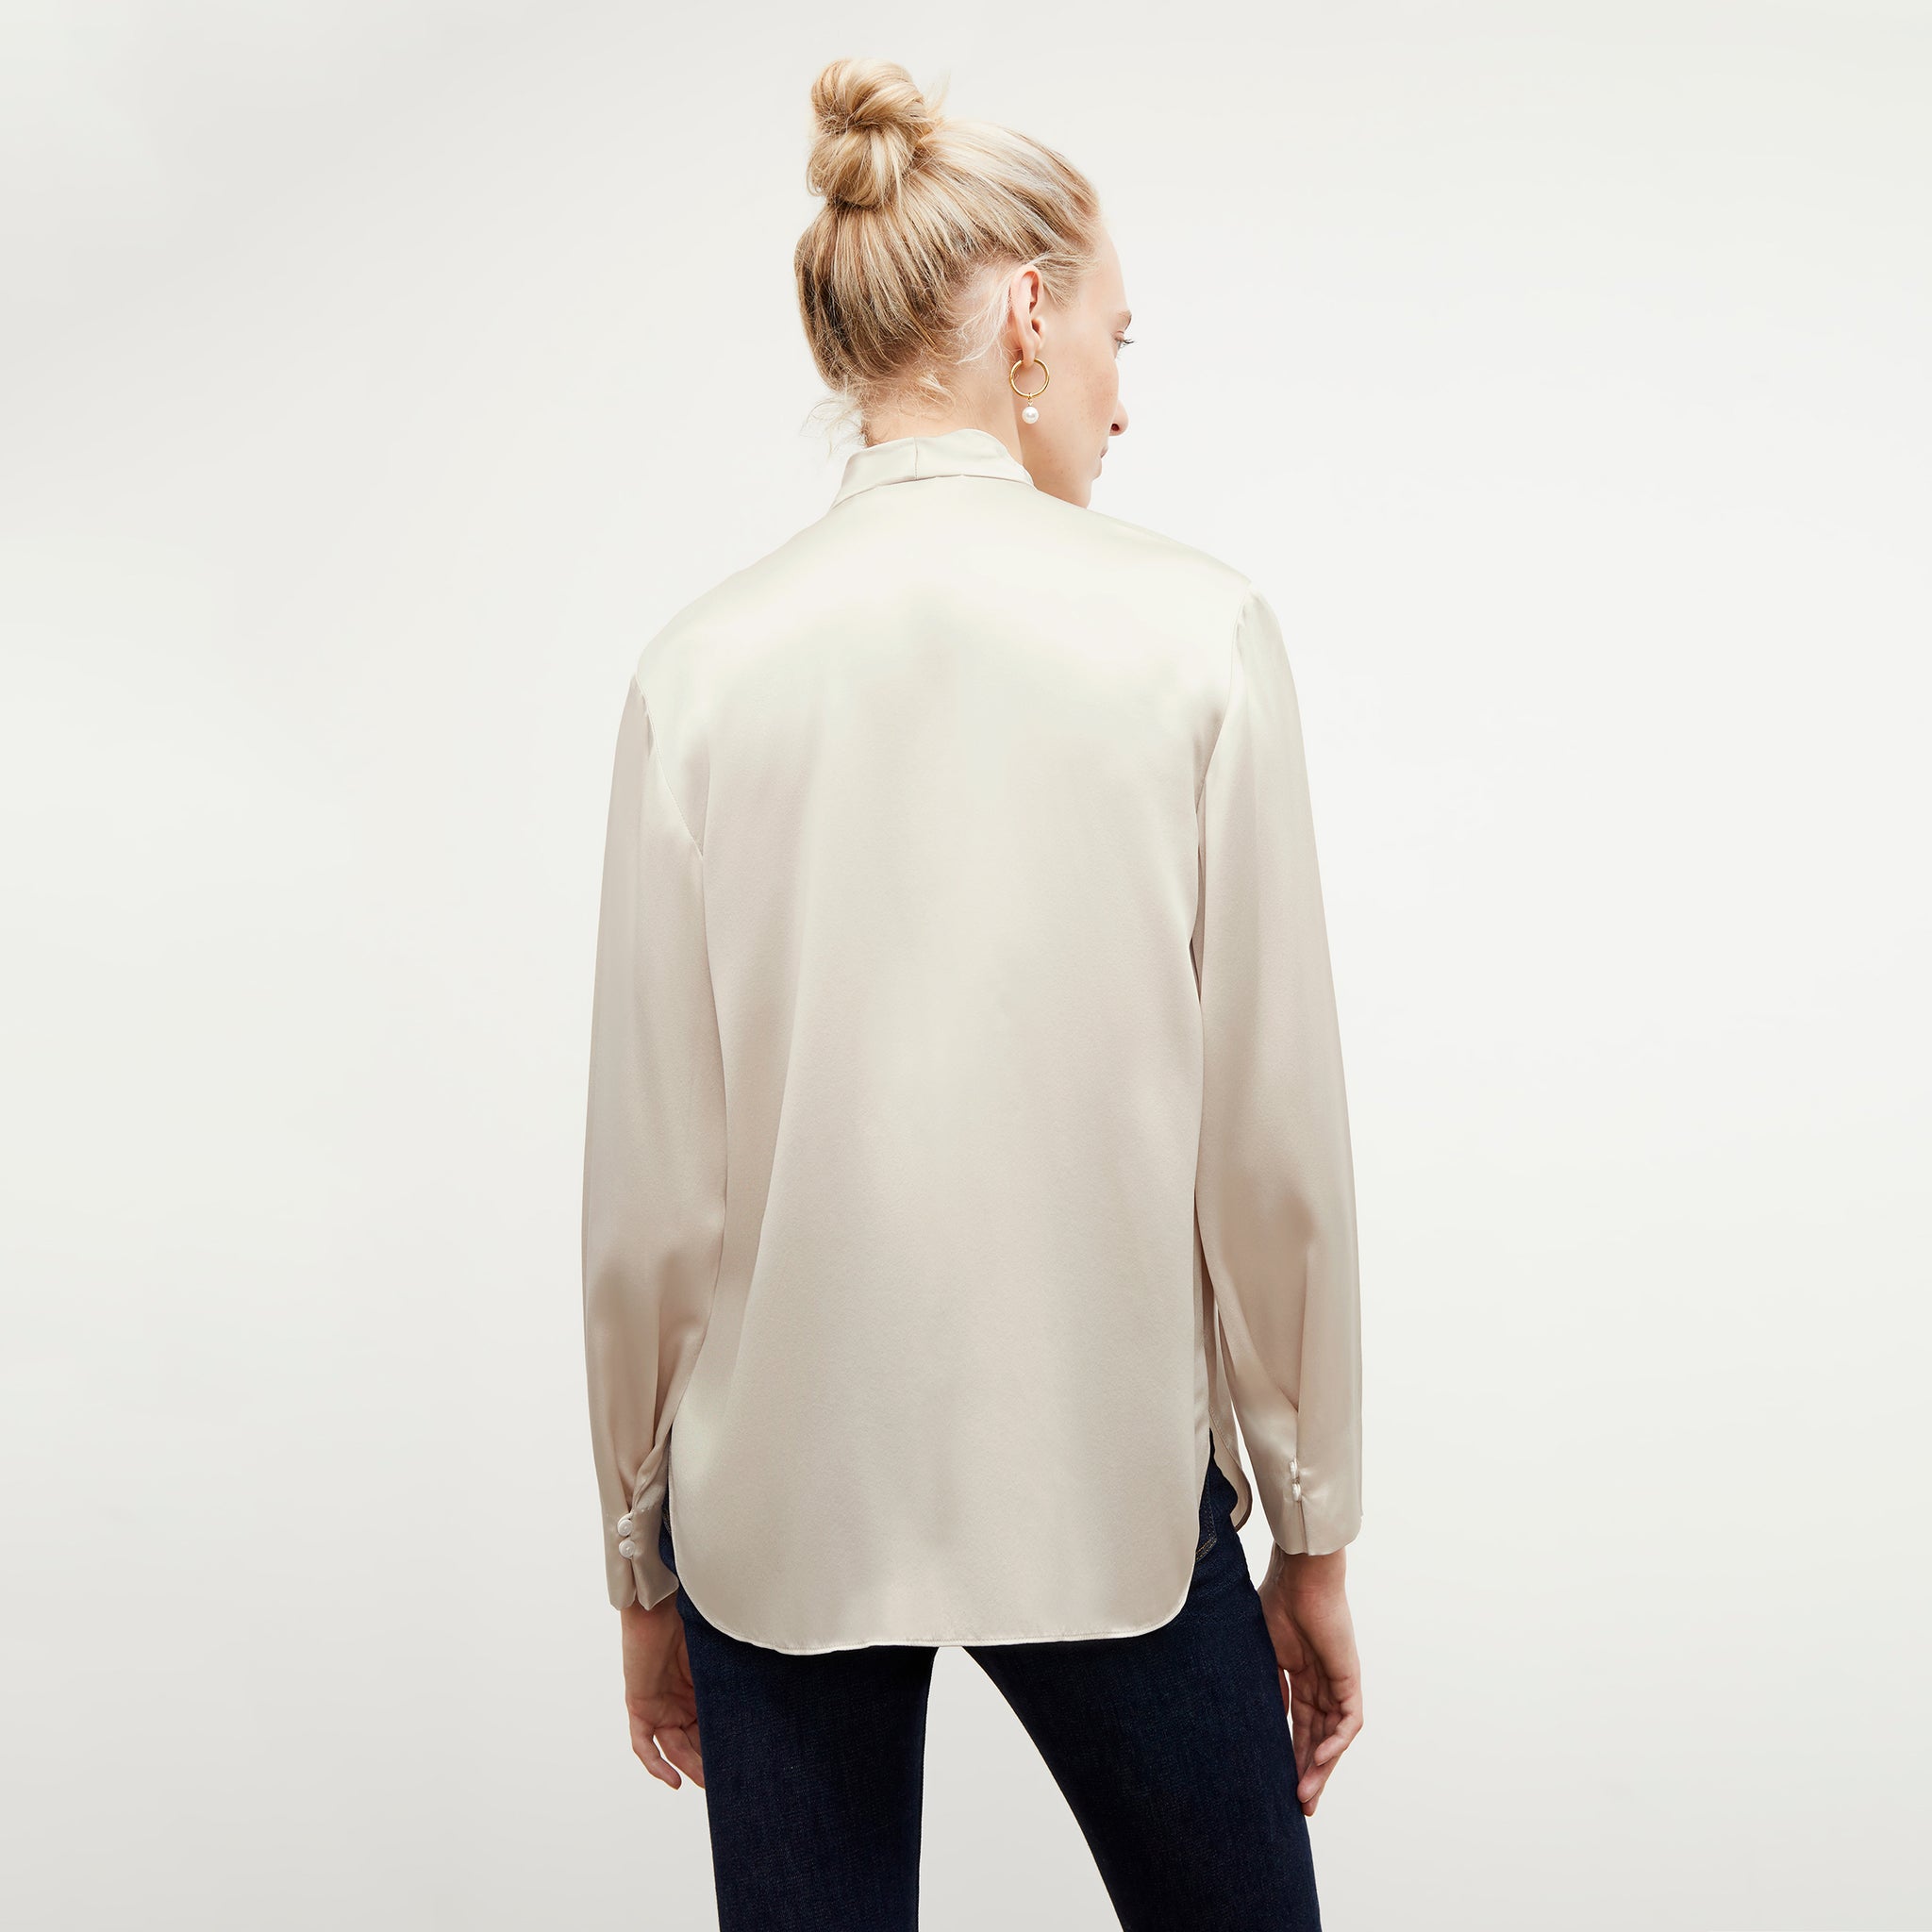 Back image of a woman wearing the Darcy Top - Washable Silk Charmeuse in Pearl